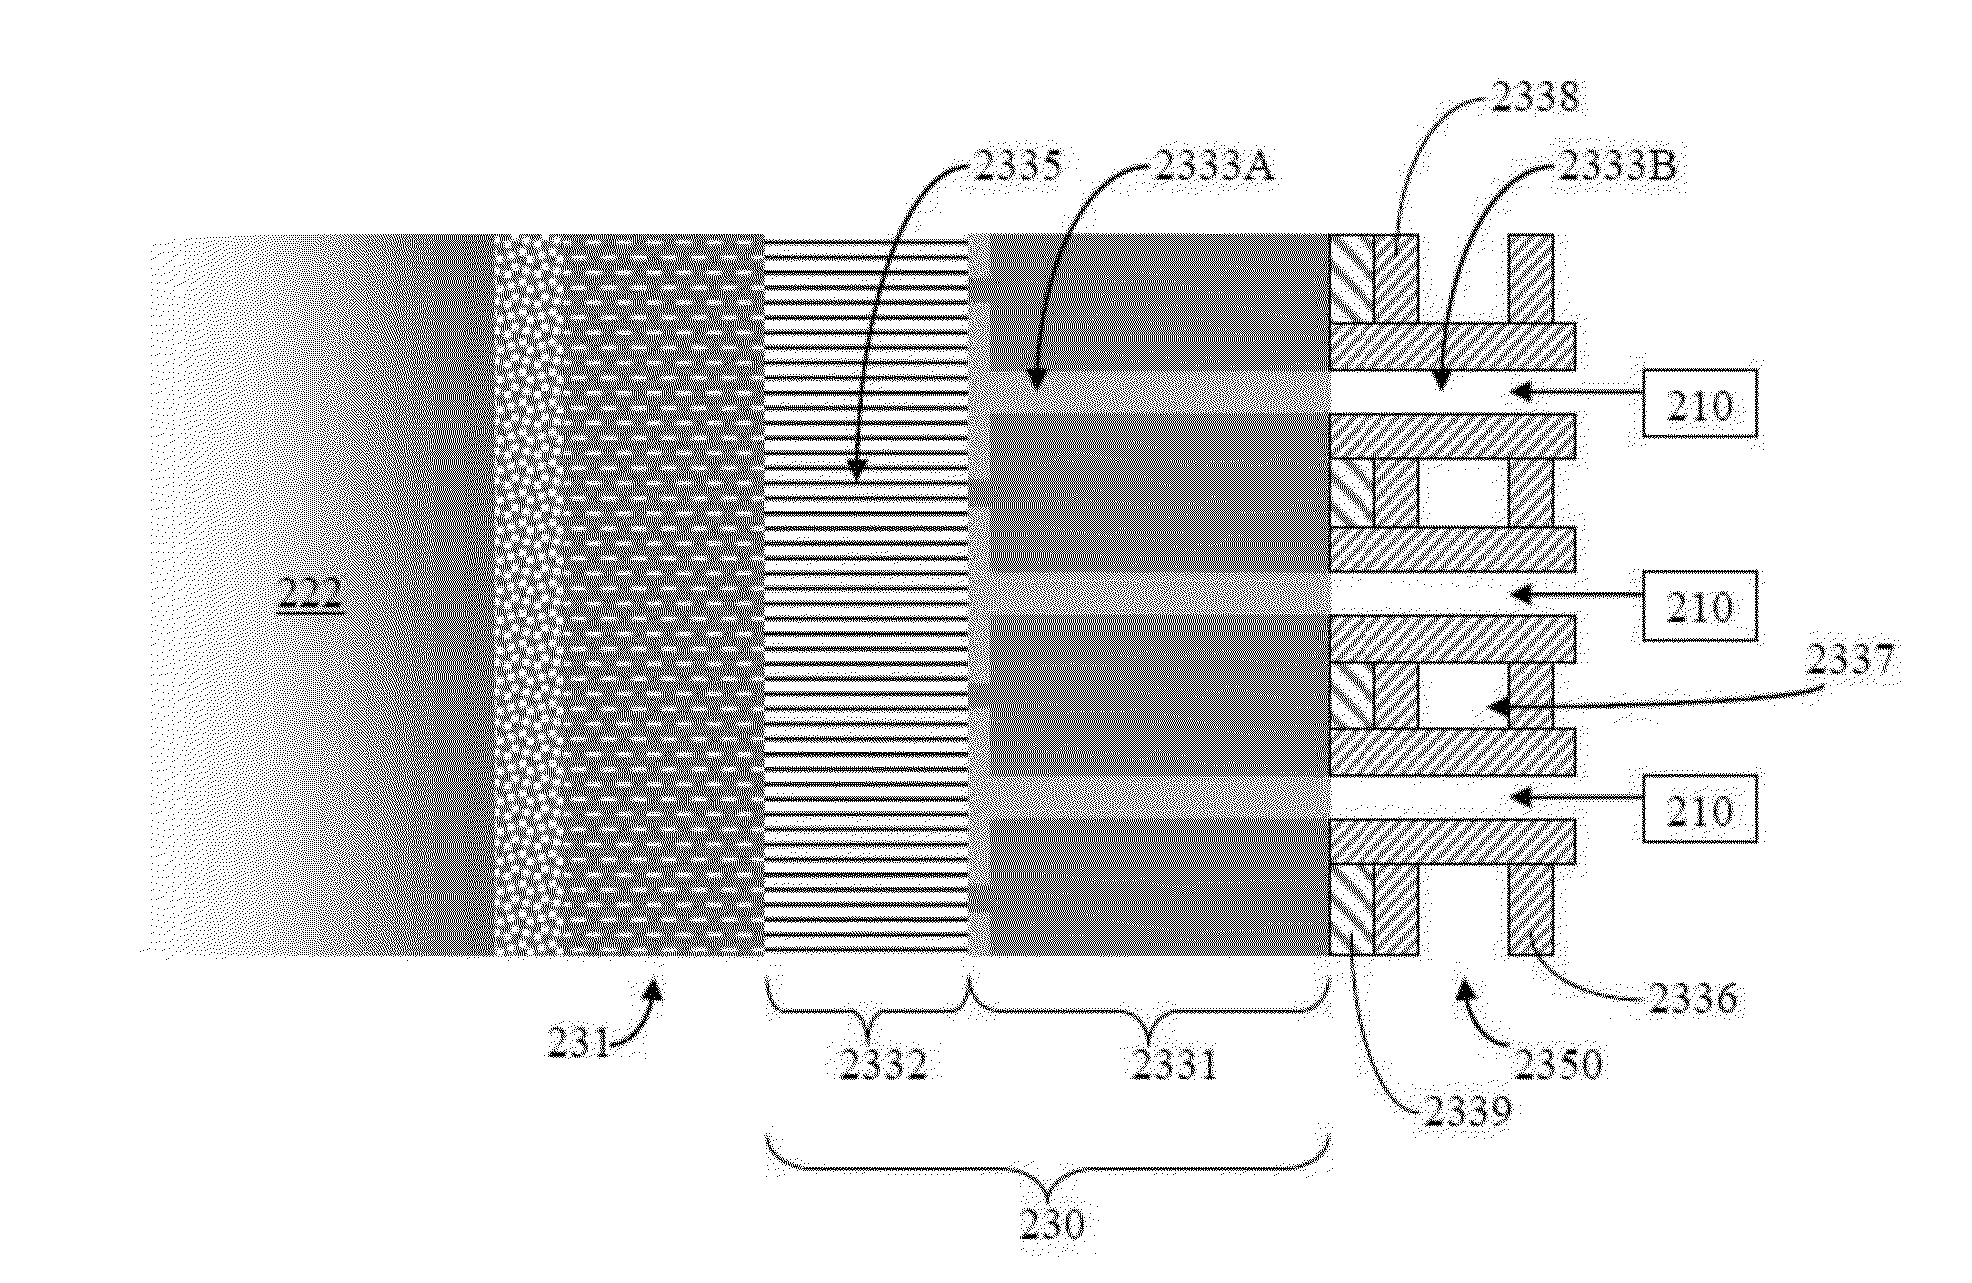 System and method for high efficiency power generation using a carbon dioxide circulating working fluid